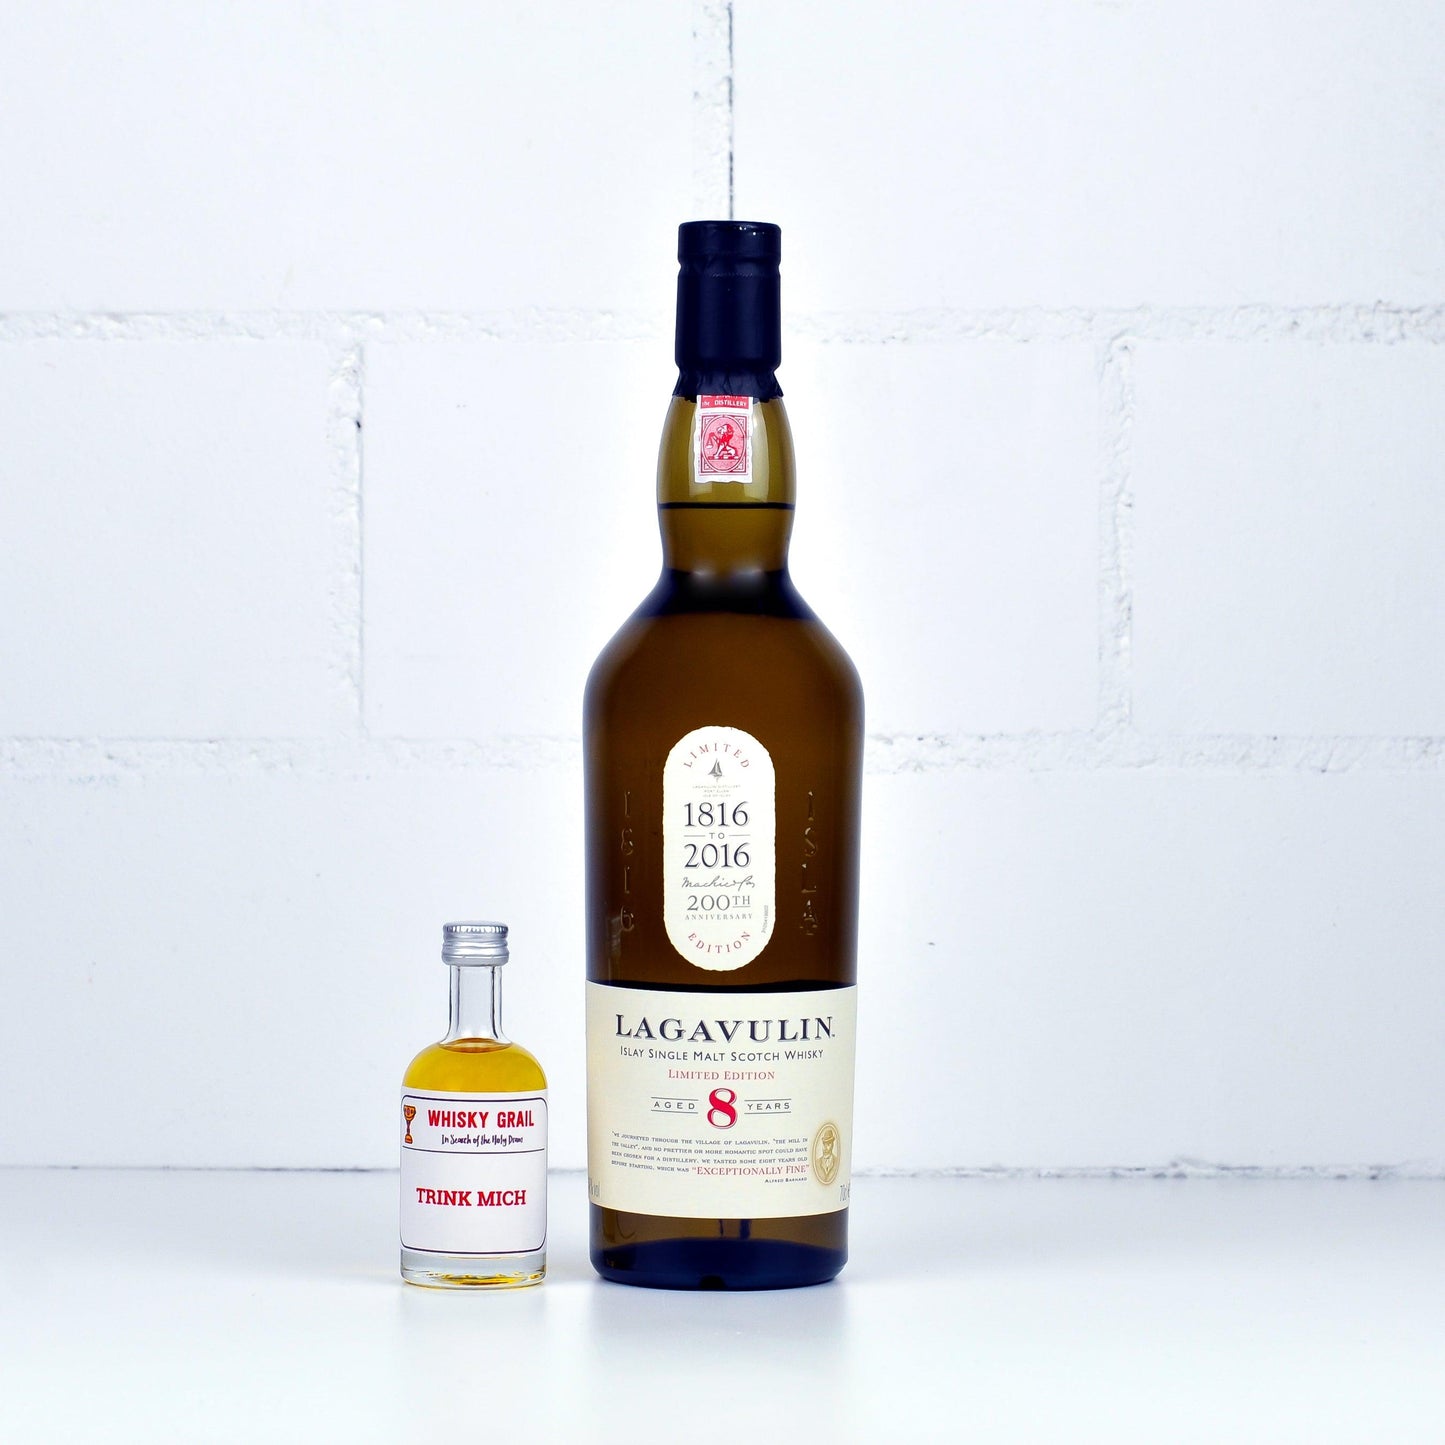 Lagavulin 8 Years Old - Whisky Grail